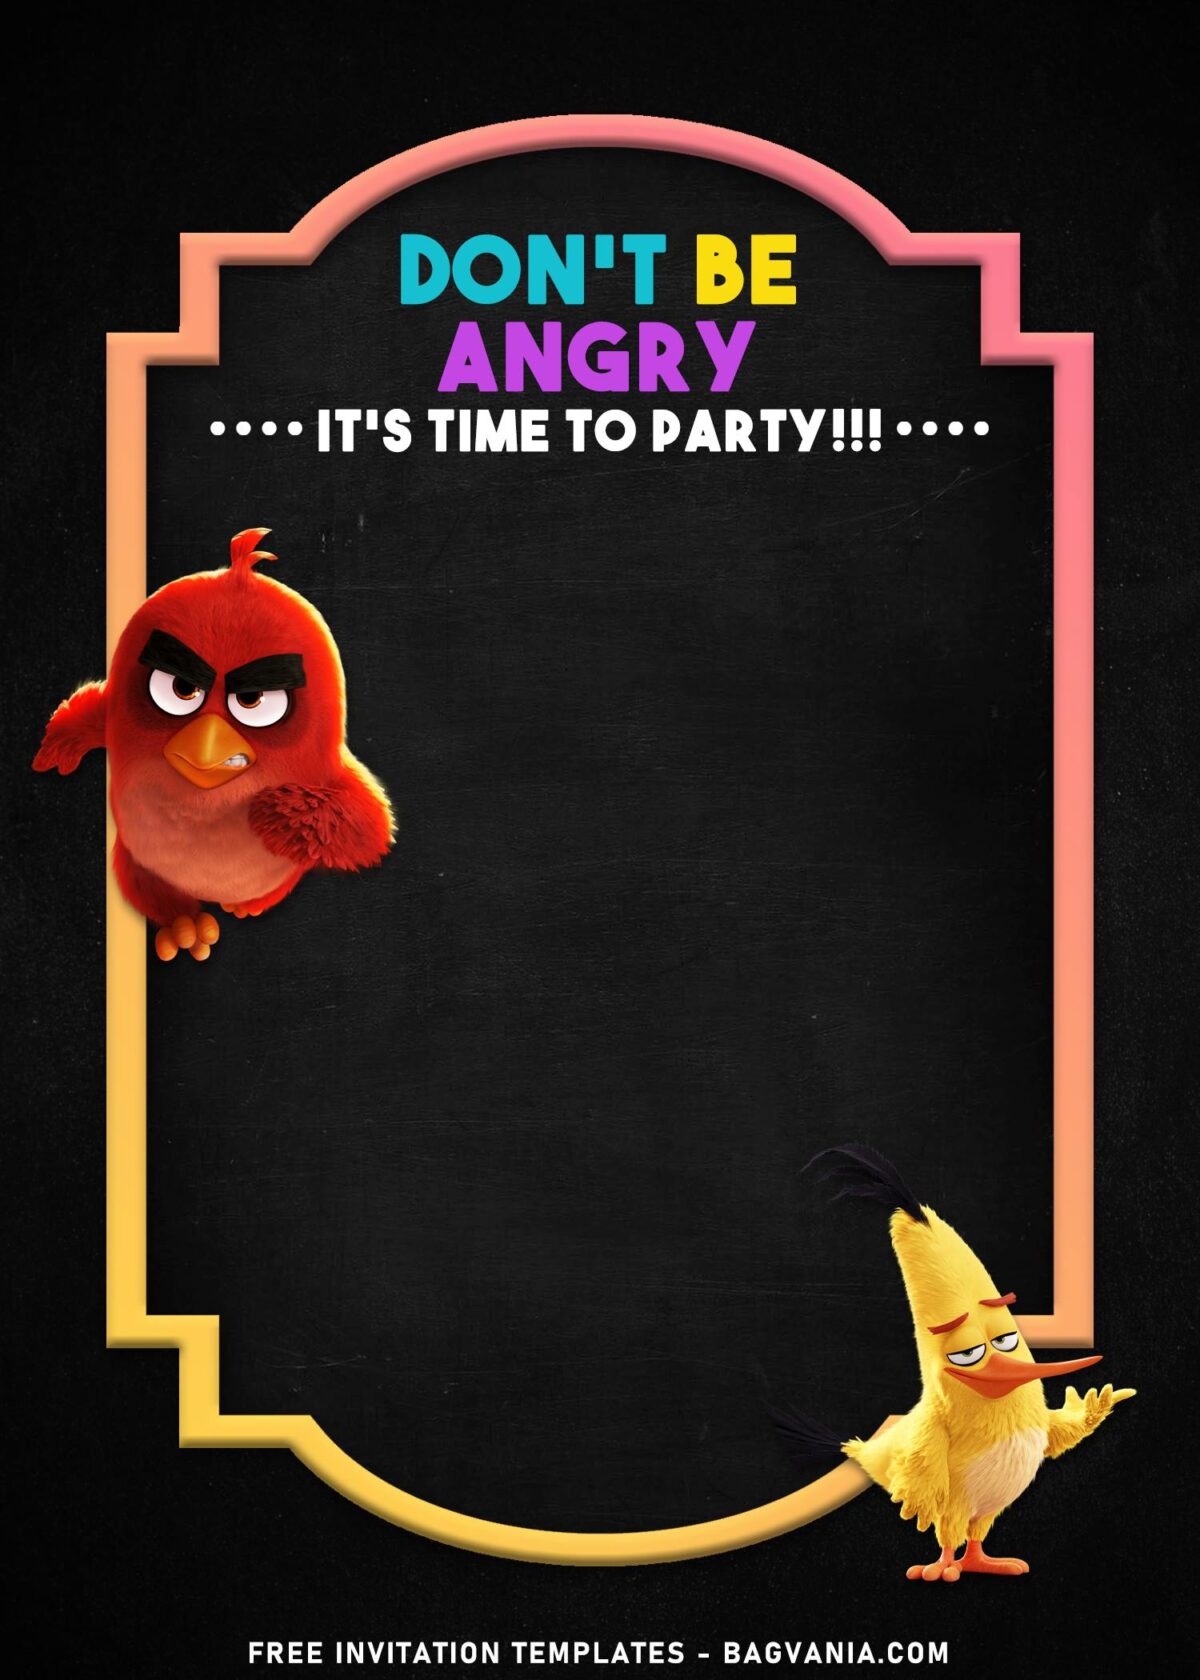 9+ Angry Birds Chalkboard Birthday Invitation Templates with colorful chalkboard design